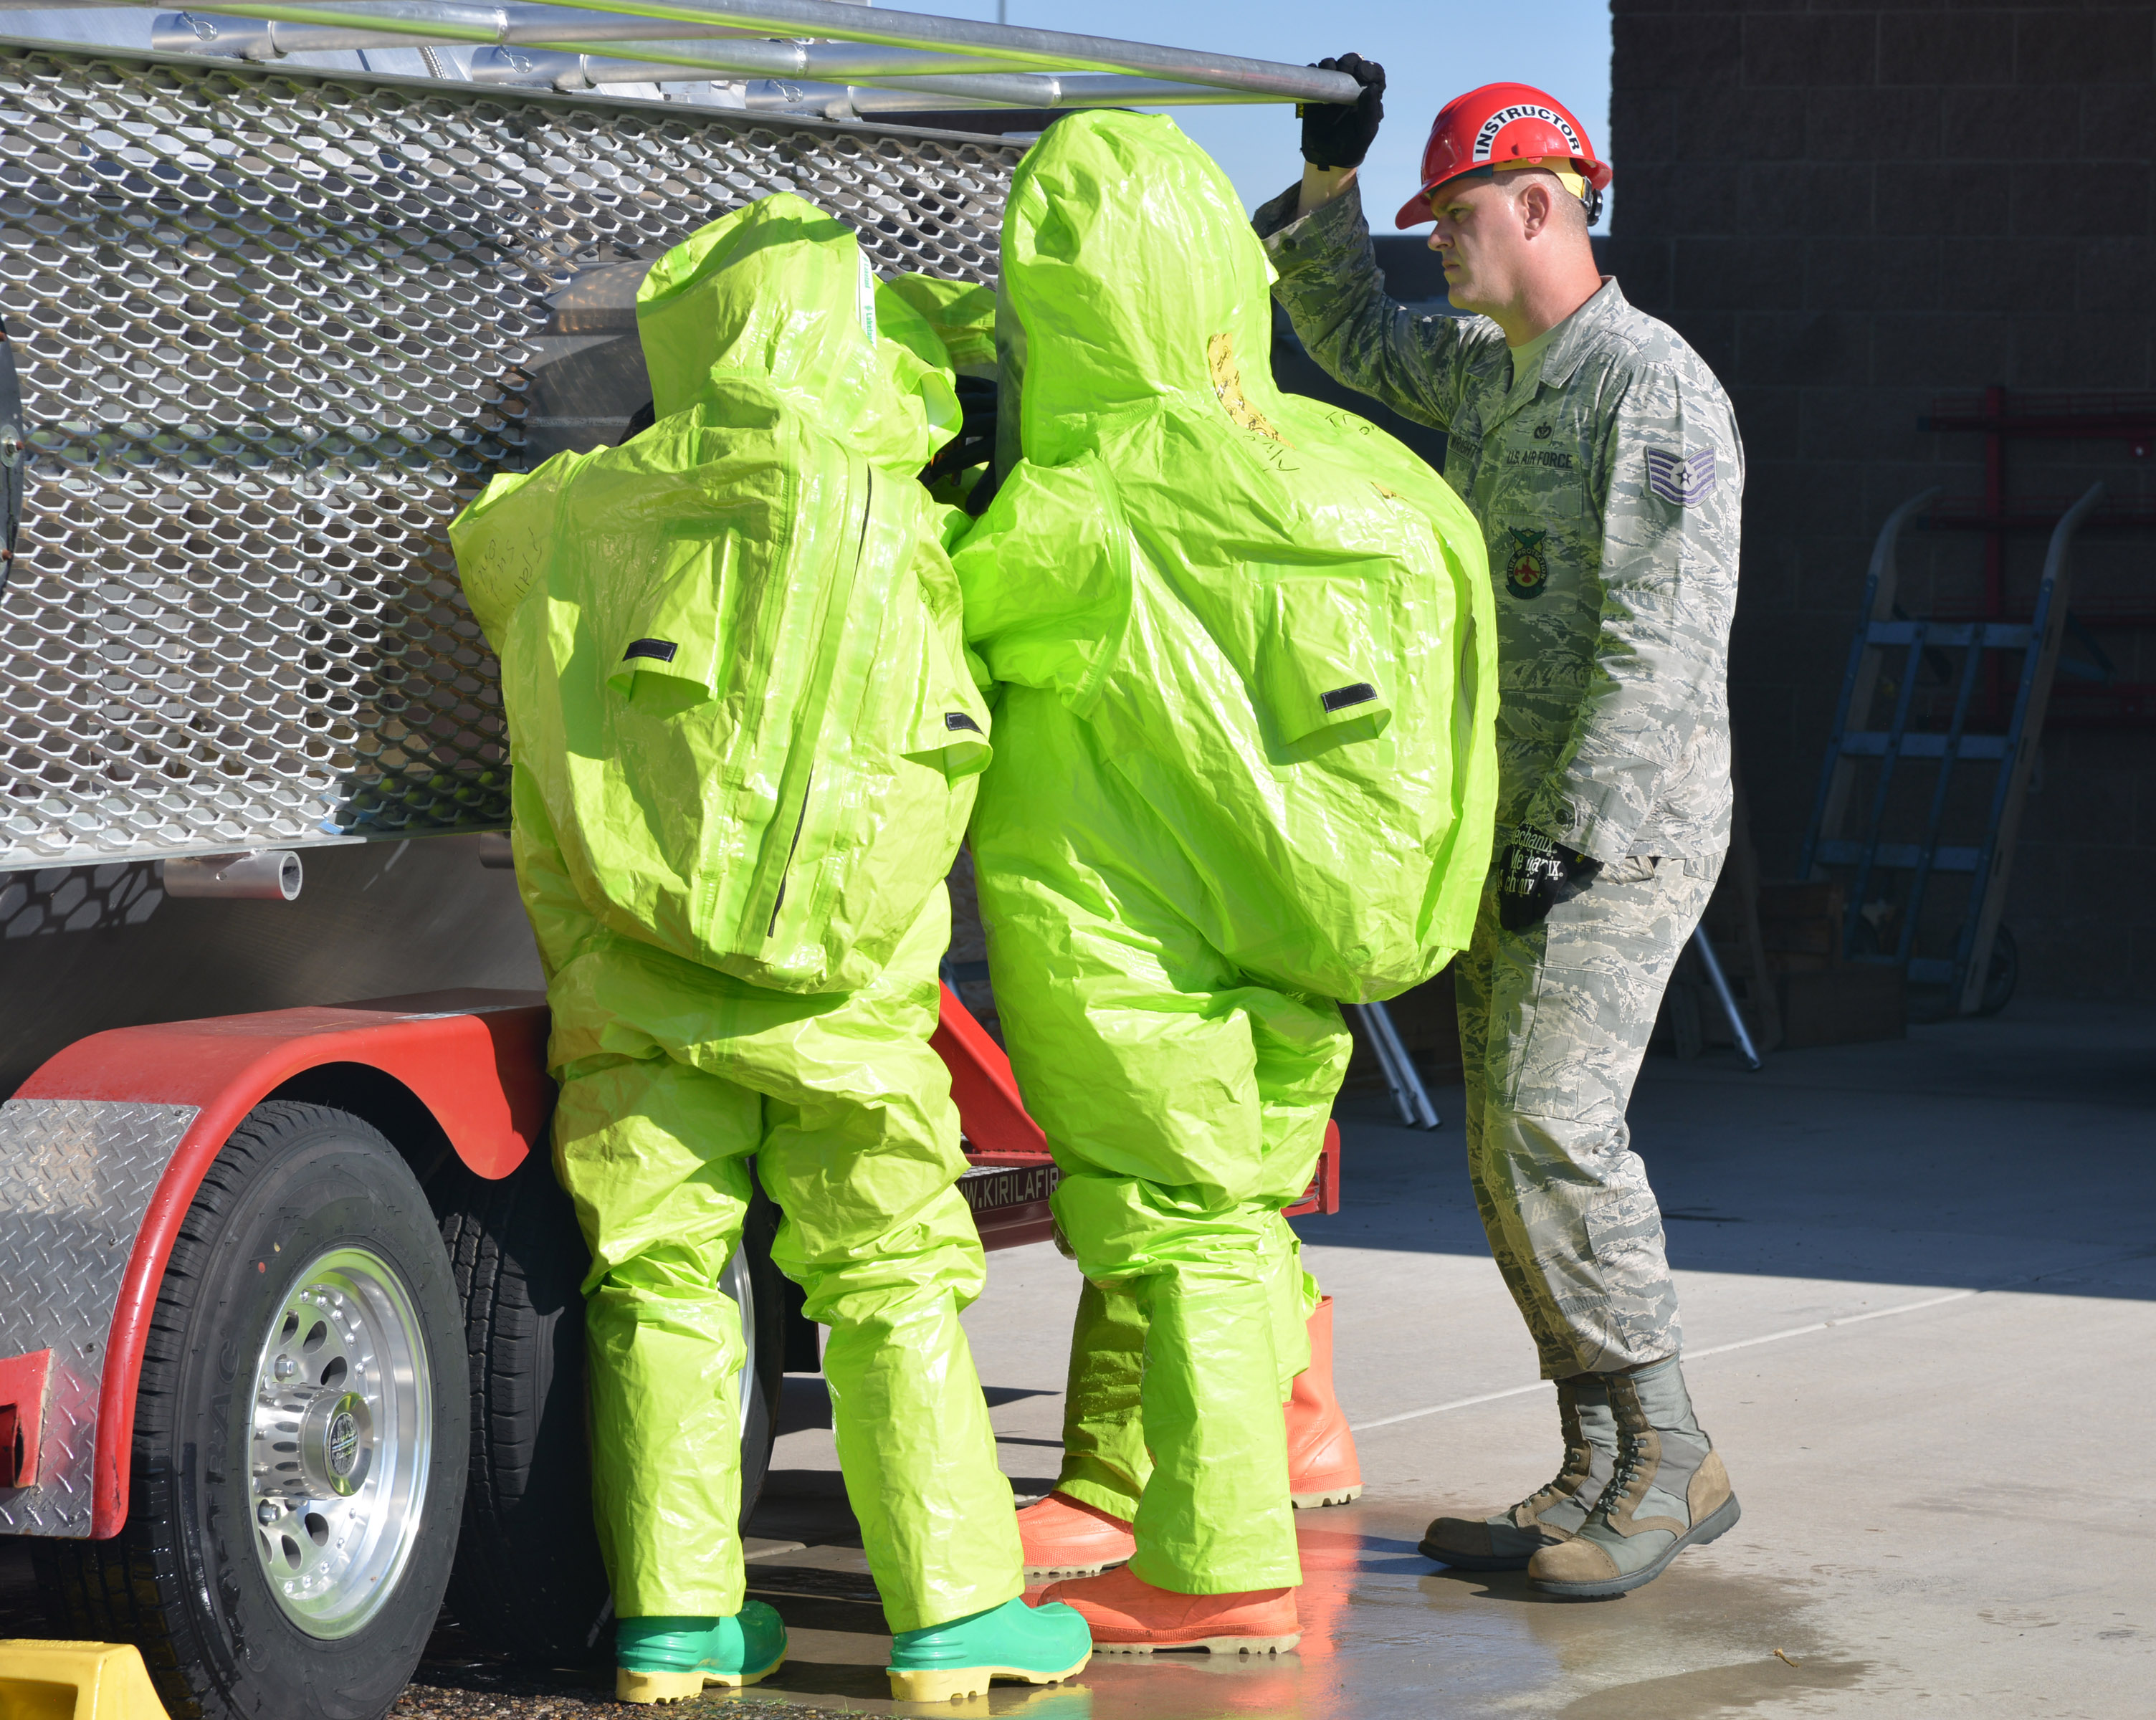 Firefighters Train To Contain Hazardous Materials Kirtland Air Force Base Article Display